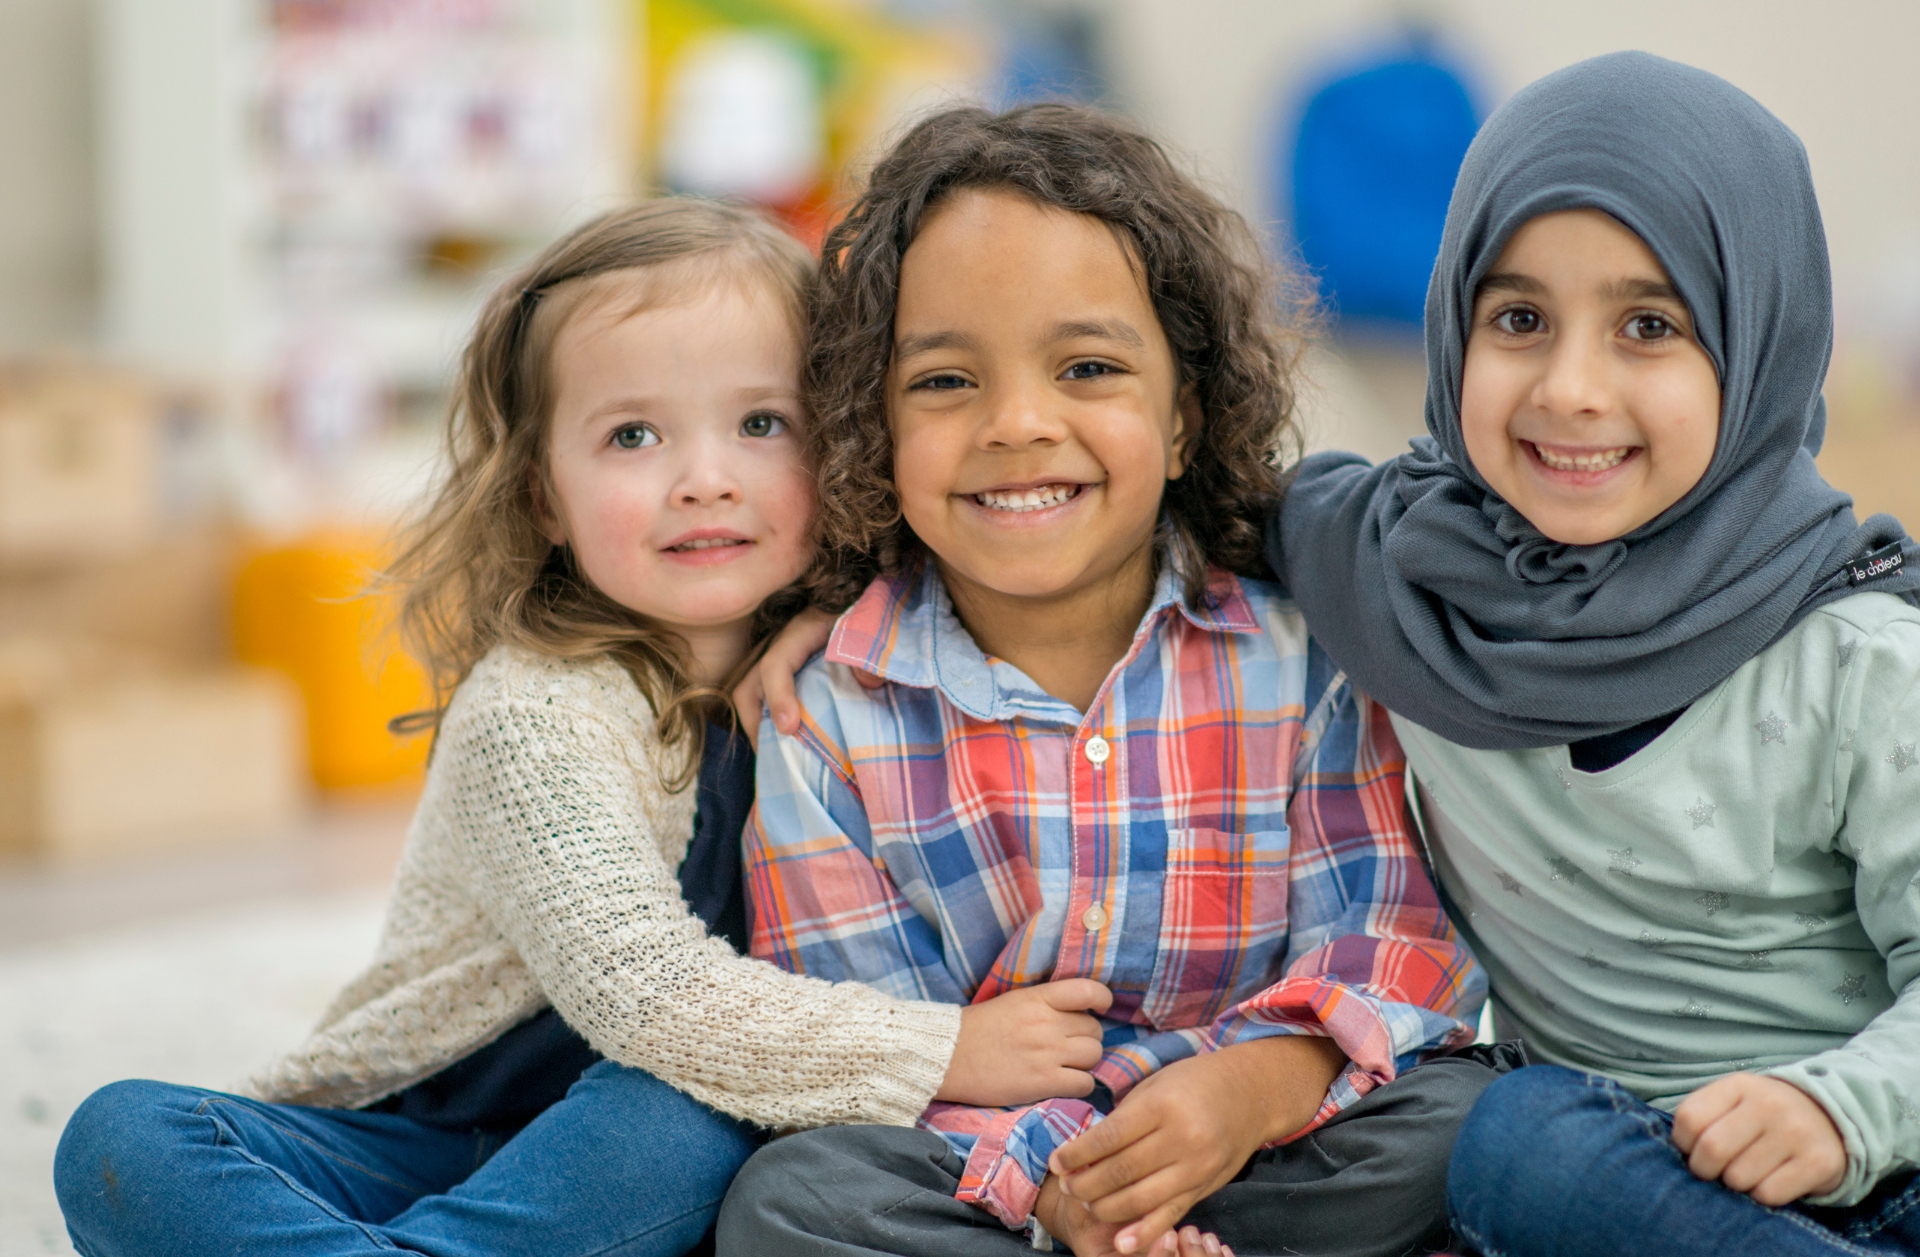 A group of three children (a white girl, a boy with brown skin, and a Muslim girl) sitting together in a preschool.